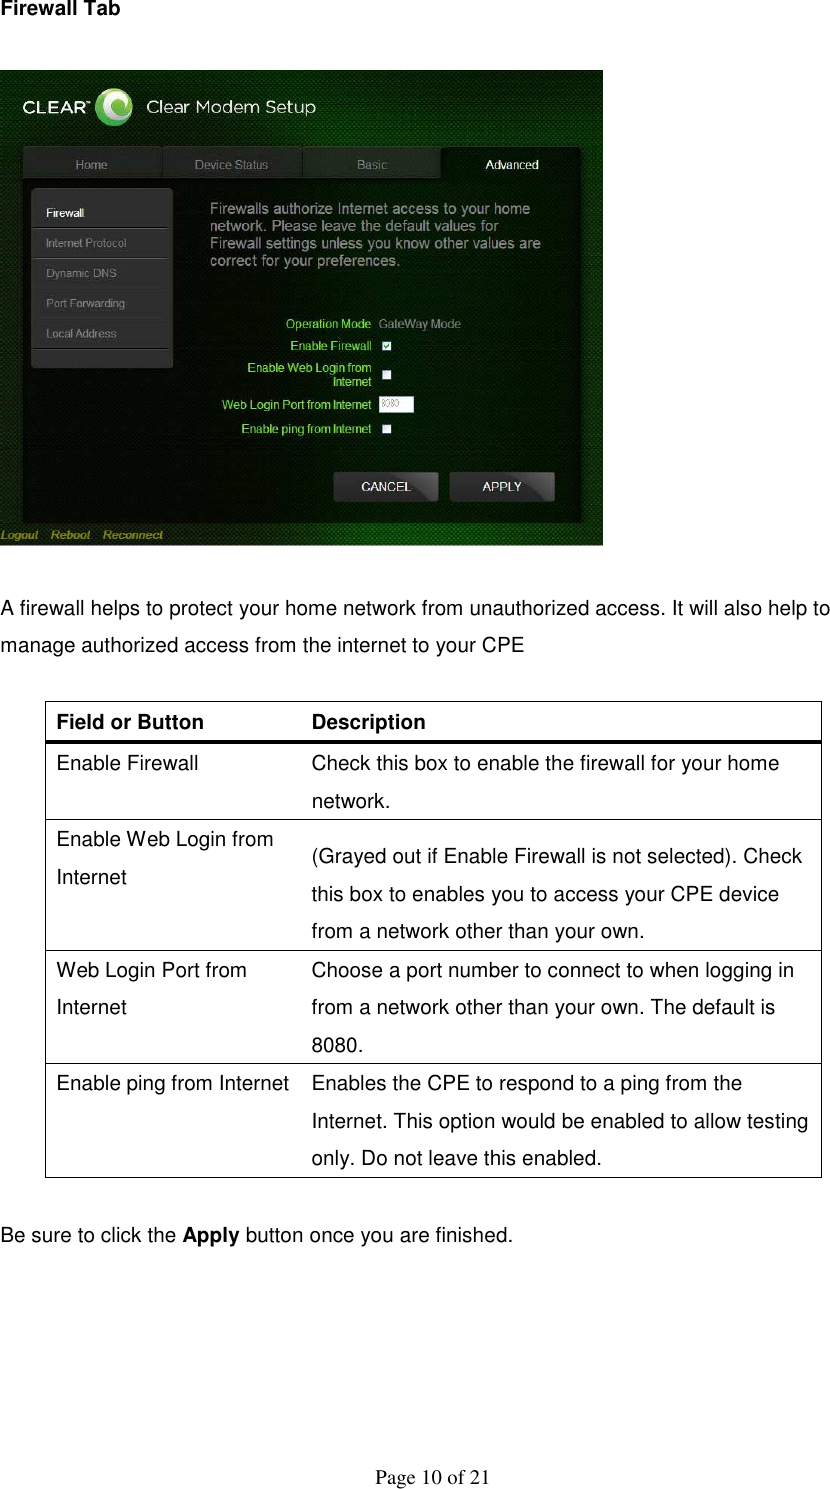  Page 10 of 21 Firewall Tab    A firewall helps to protect your home network from unauthorized access. It will also help to manage authorized access from the internet to your CPE  Field or Button   Description   Enable Firewall    Check this box to enable the firewall for your home network.   Enable Web Login from Internet    (Grayed out if Enable Firewall is not selected). Check this box to enables you to access your CPE device from a network other than your own.   Web Login Port from Internet   Choose a port number to connect to when logging in from a network other than your own. The default is 8080. Enable ping from Internet  Enables the CPE to respond to a ping from the Internet. This option would be enabled to allow testing only. Do not leave this enabled.    Be sure to click the Apply button once you are finished.  